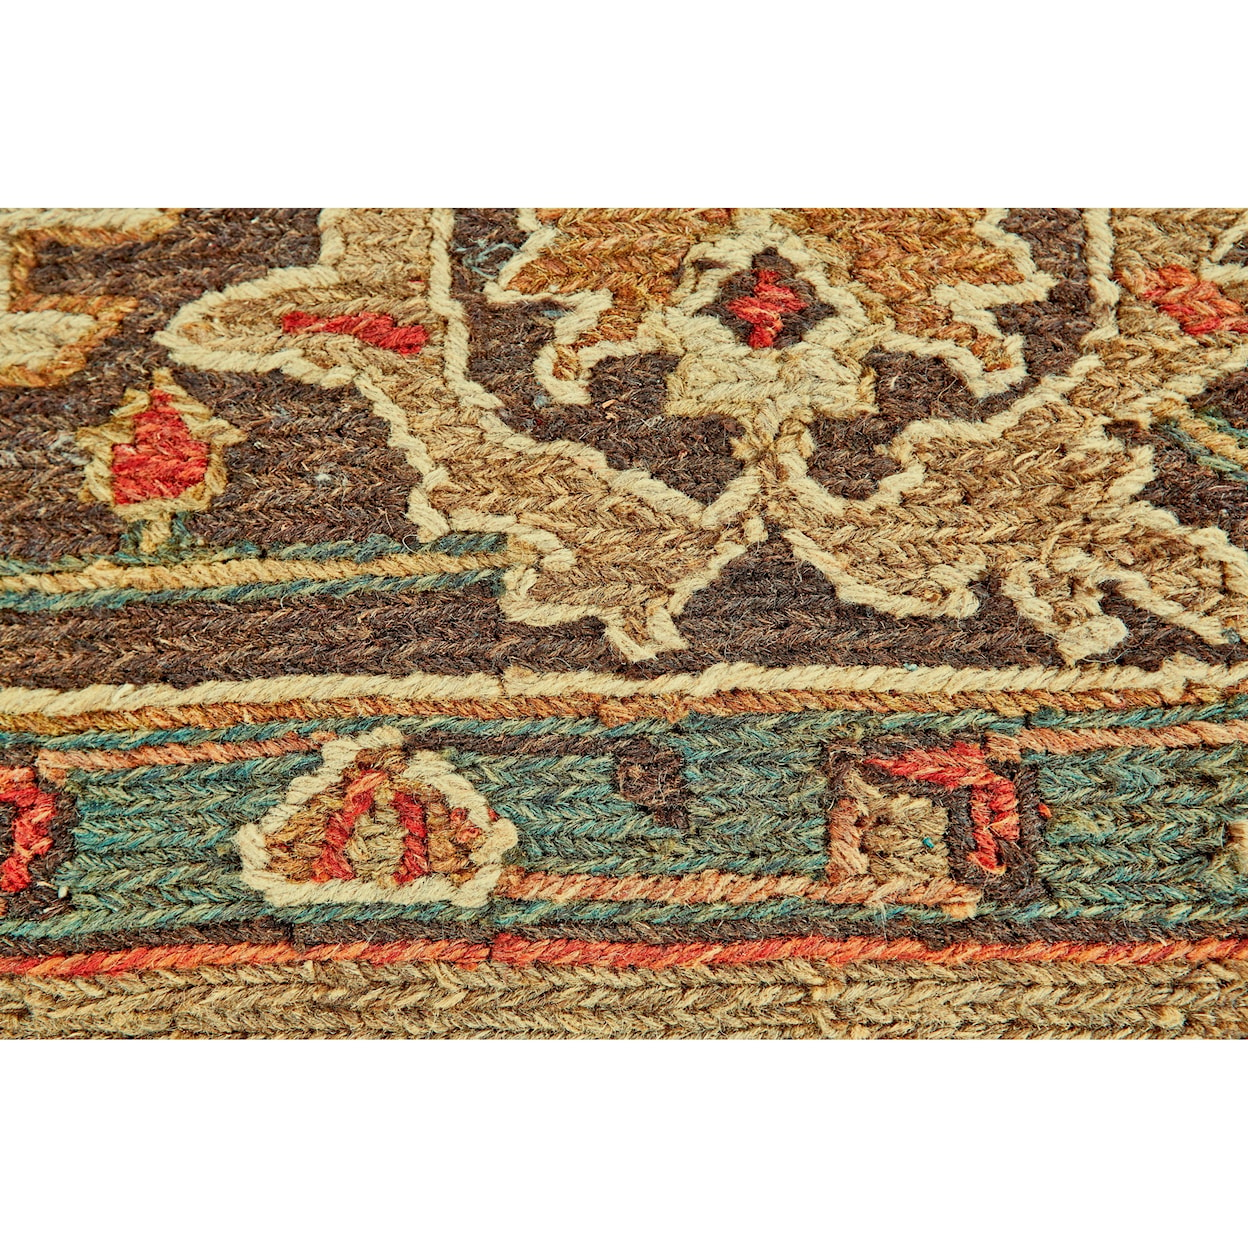 Feizy Rugs Goshen Gold/Brown 8'-6" x 11'-6" Area Rug